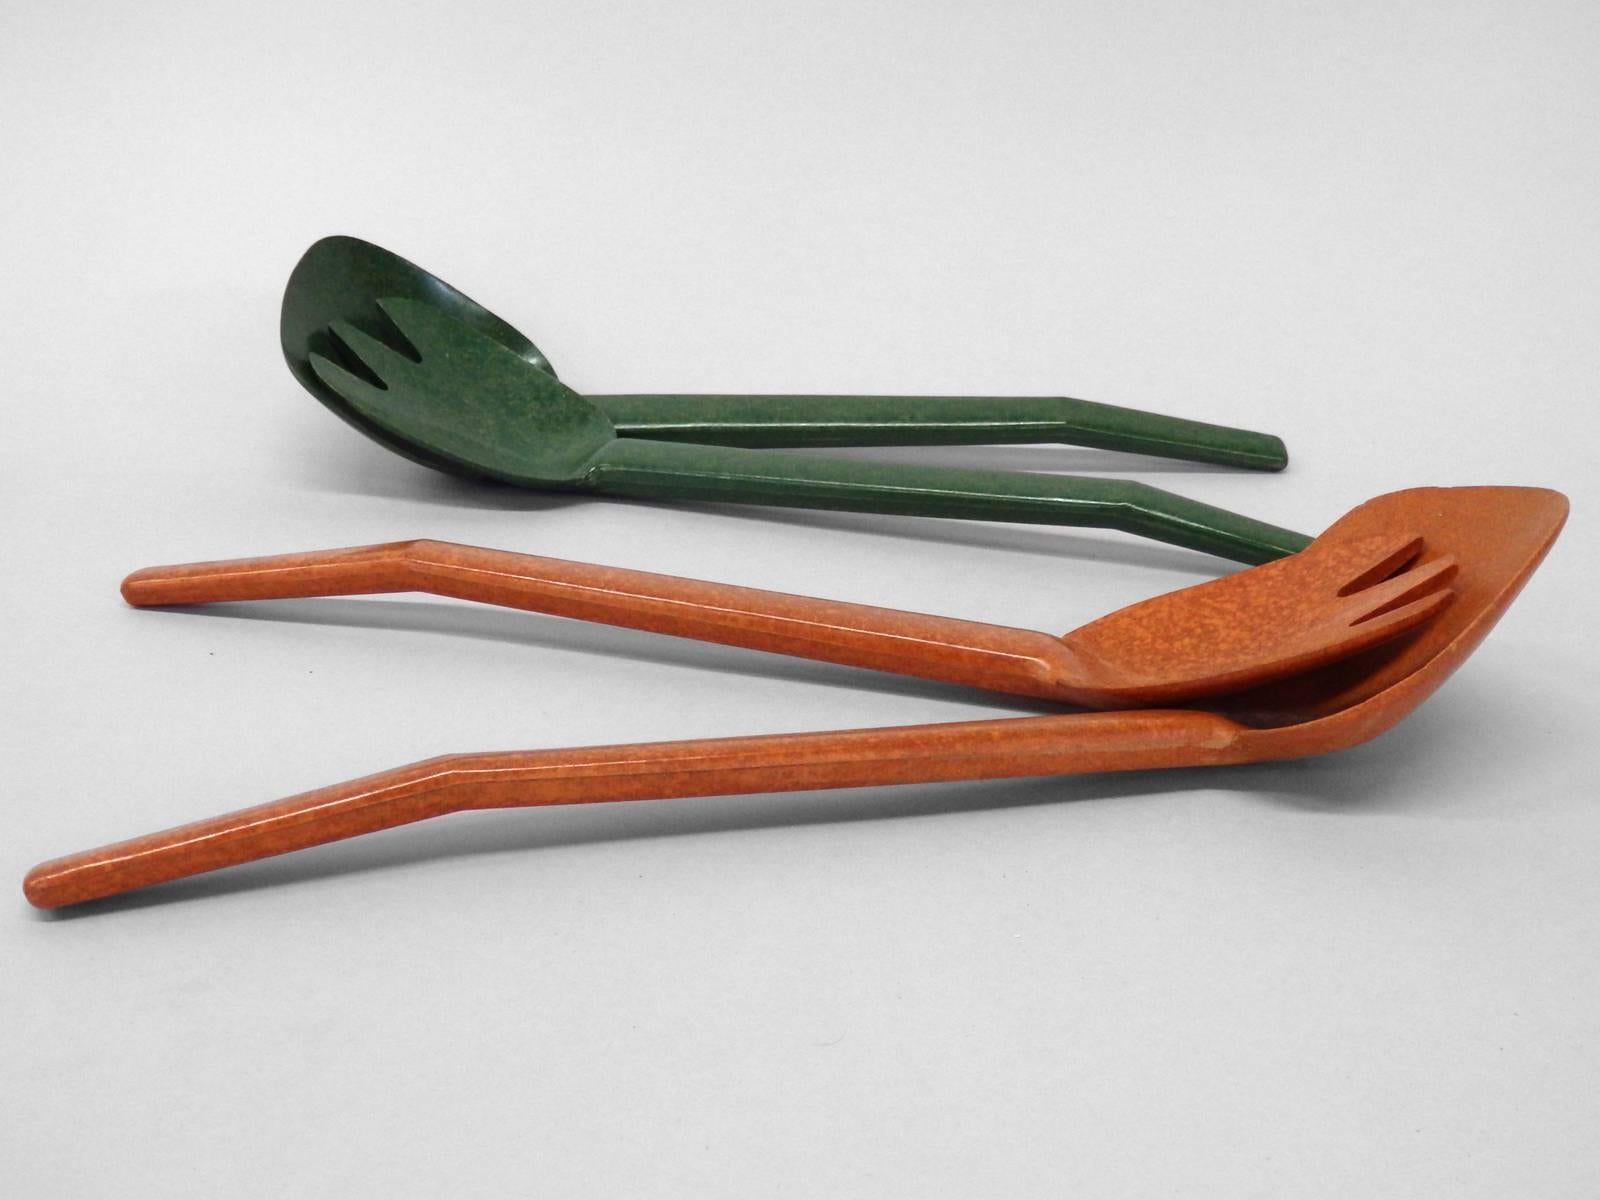 Pair of Mid-Century flintwood molded plastic salad servers by Carl Reininger Ability Products, California 1953 $275.00 each pair.